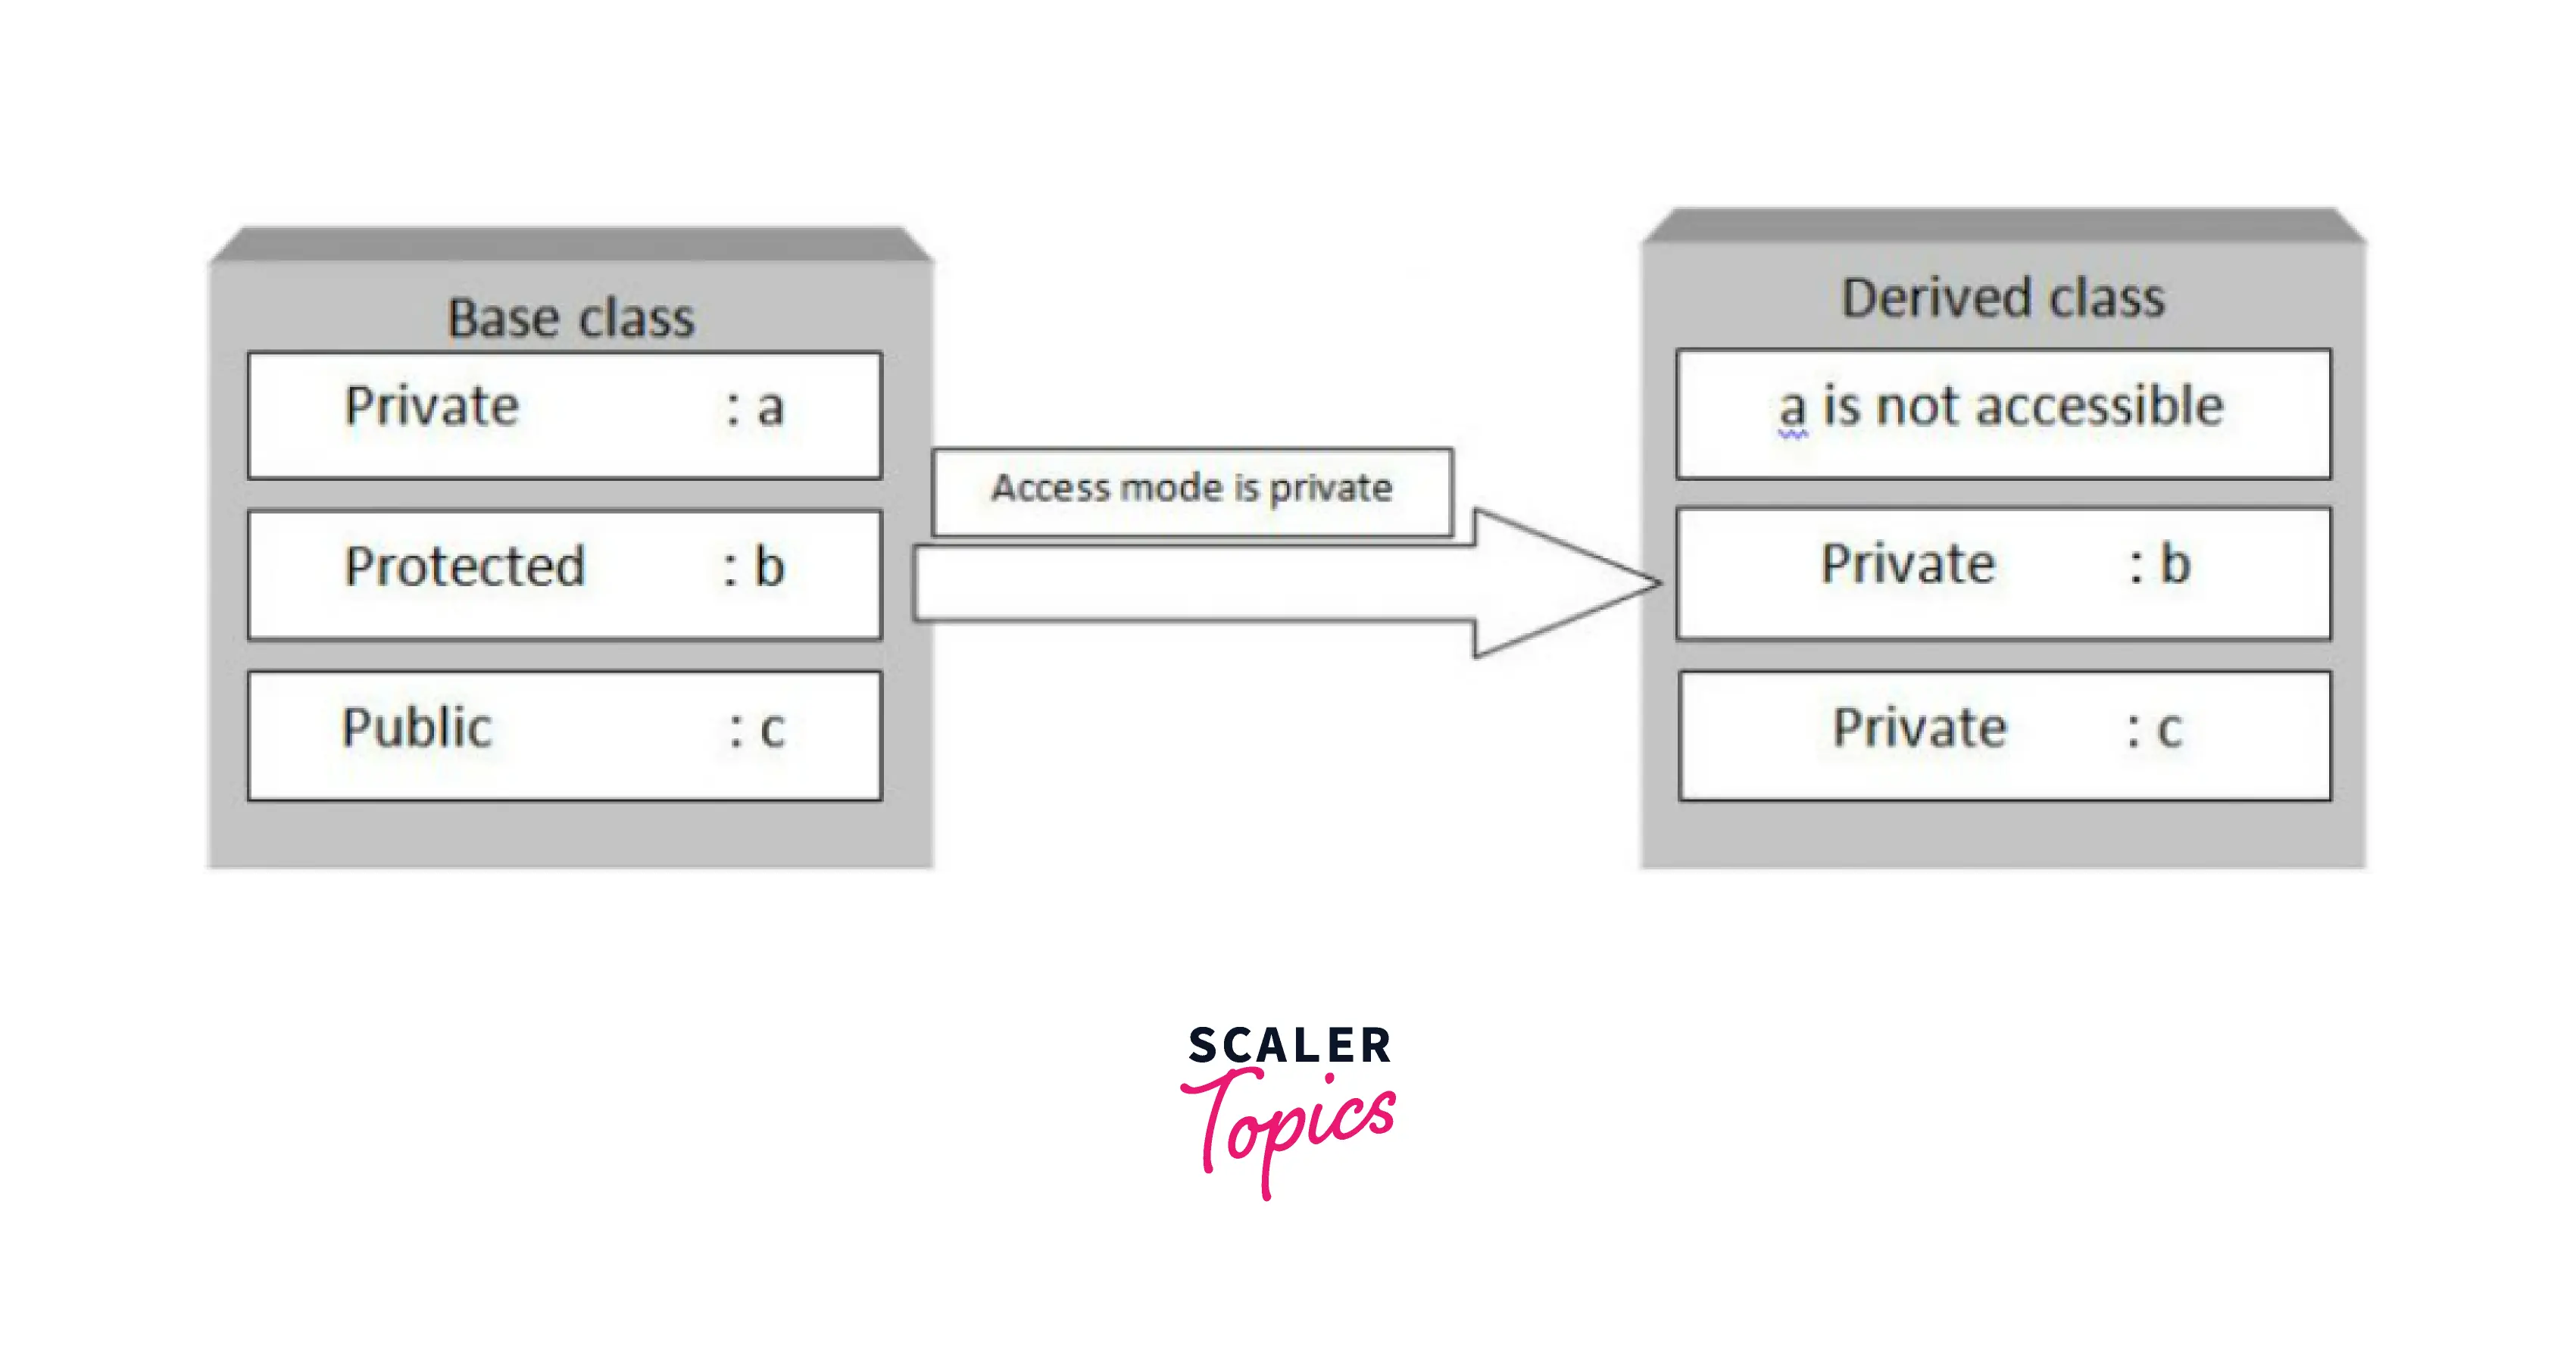 process-of-inheriting-base-class-when-mode-is-private